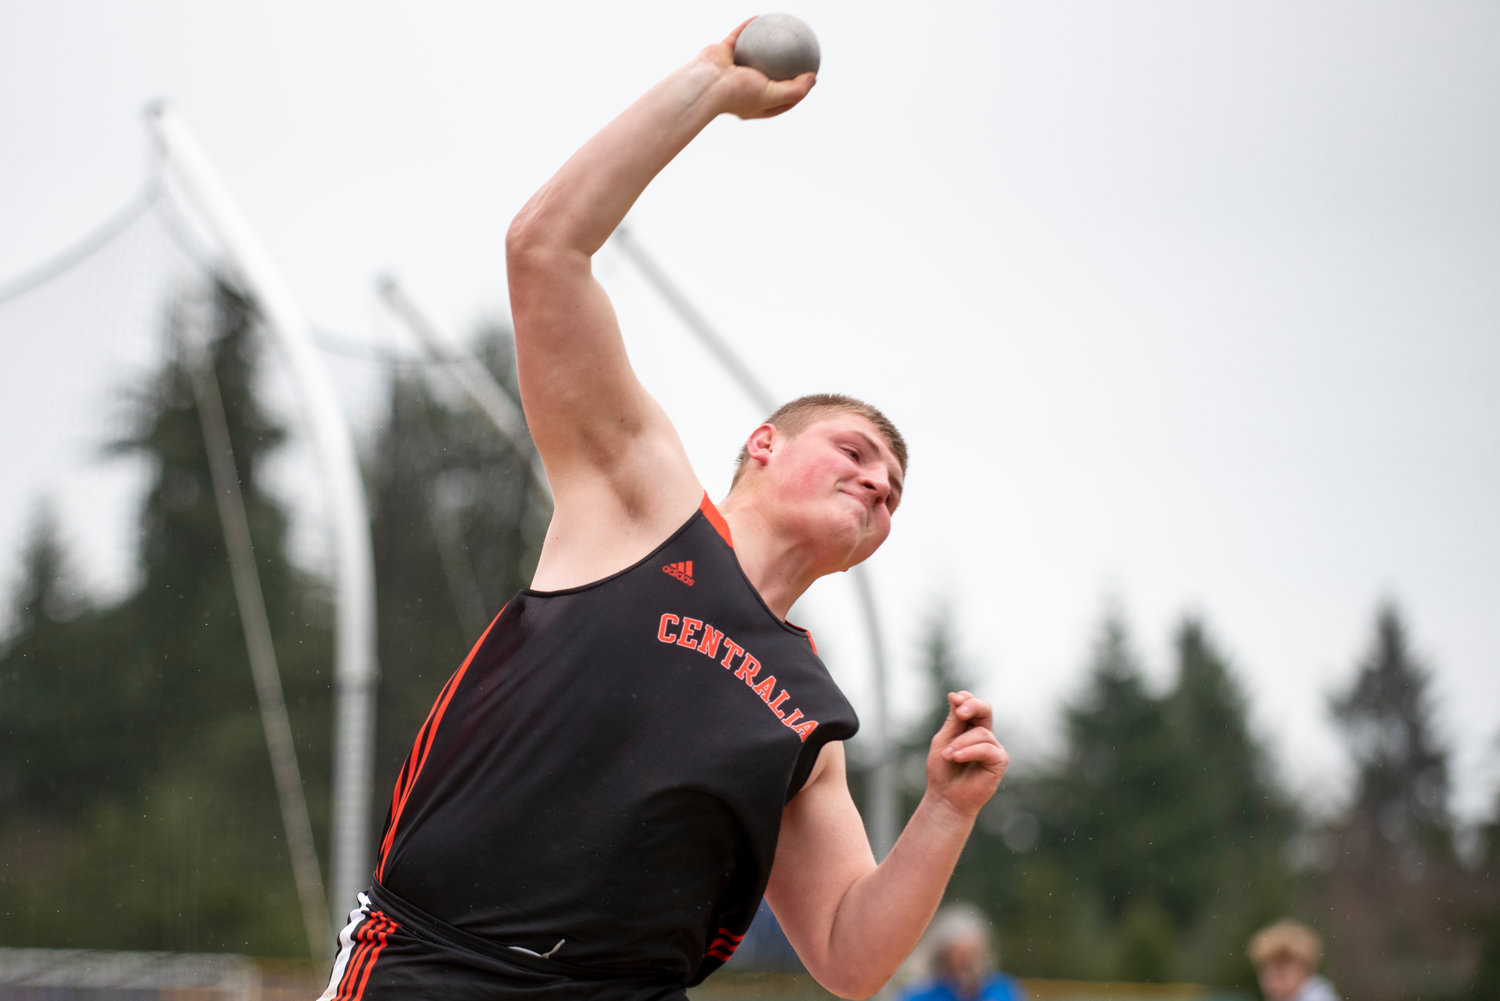 Centralia's Willie Stinkeoway tosses the shot put during a meet at Rochester on March 17.